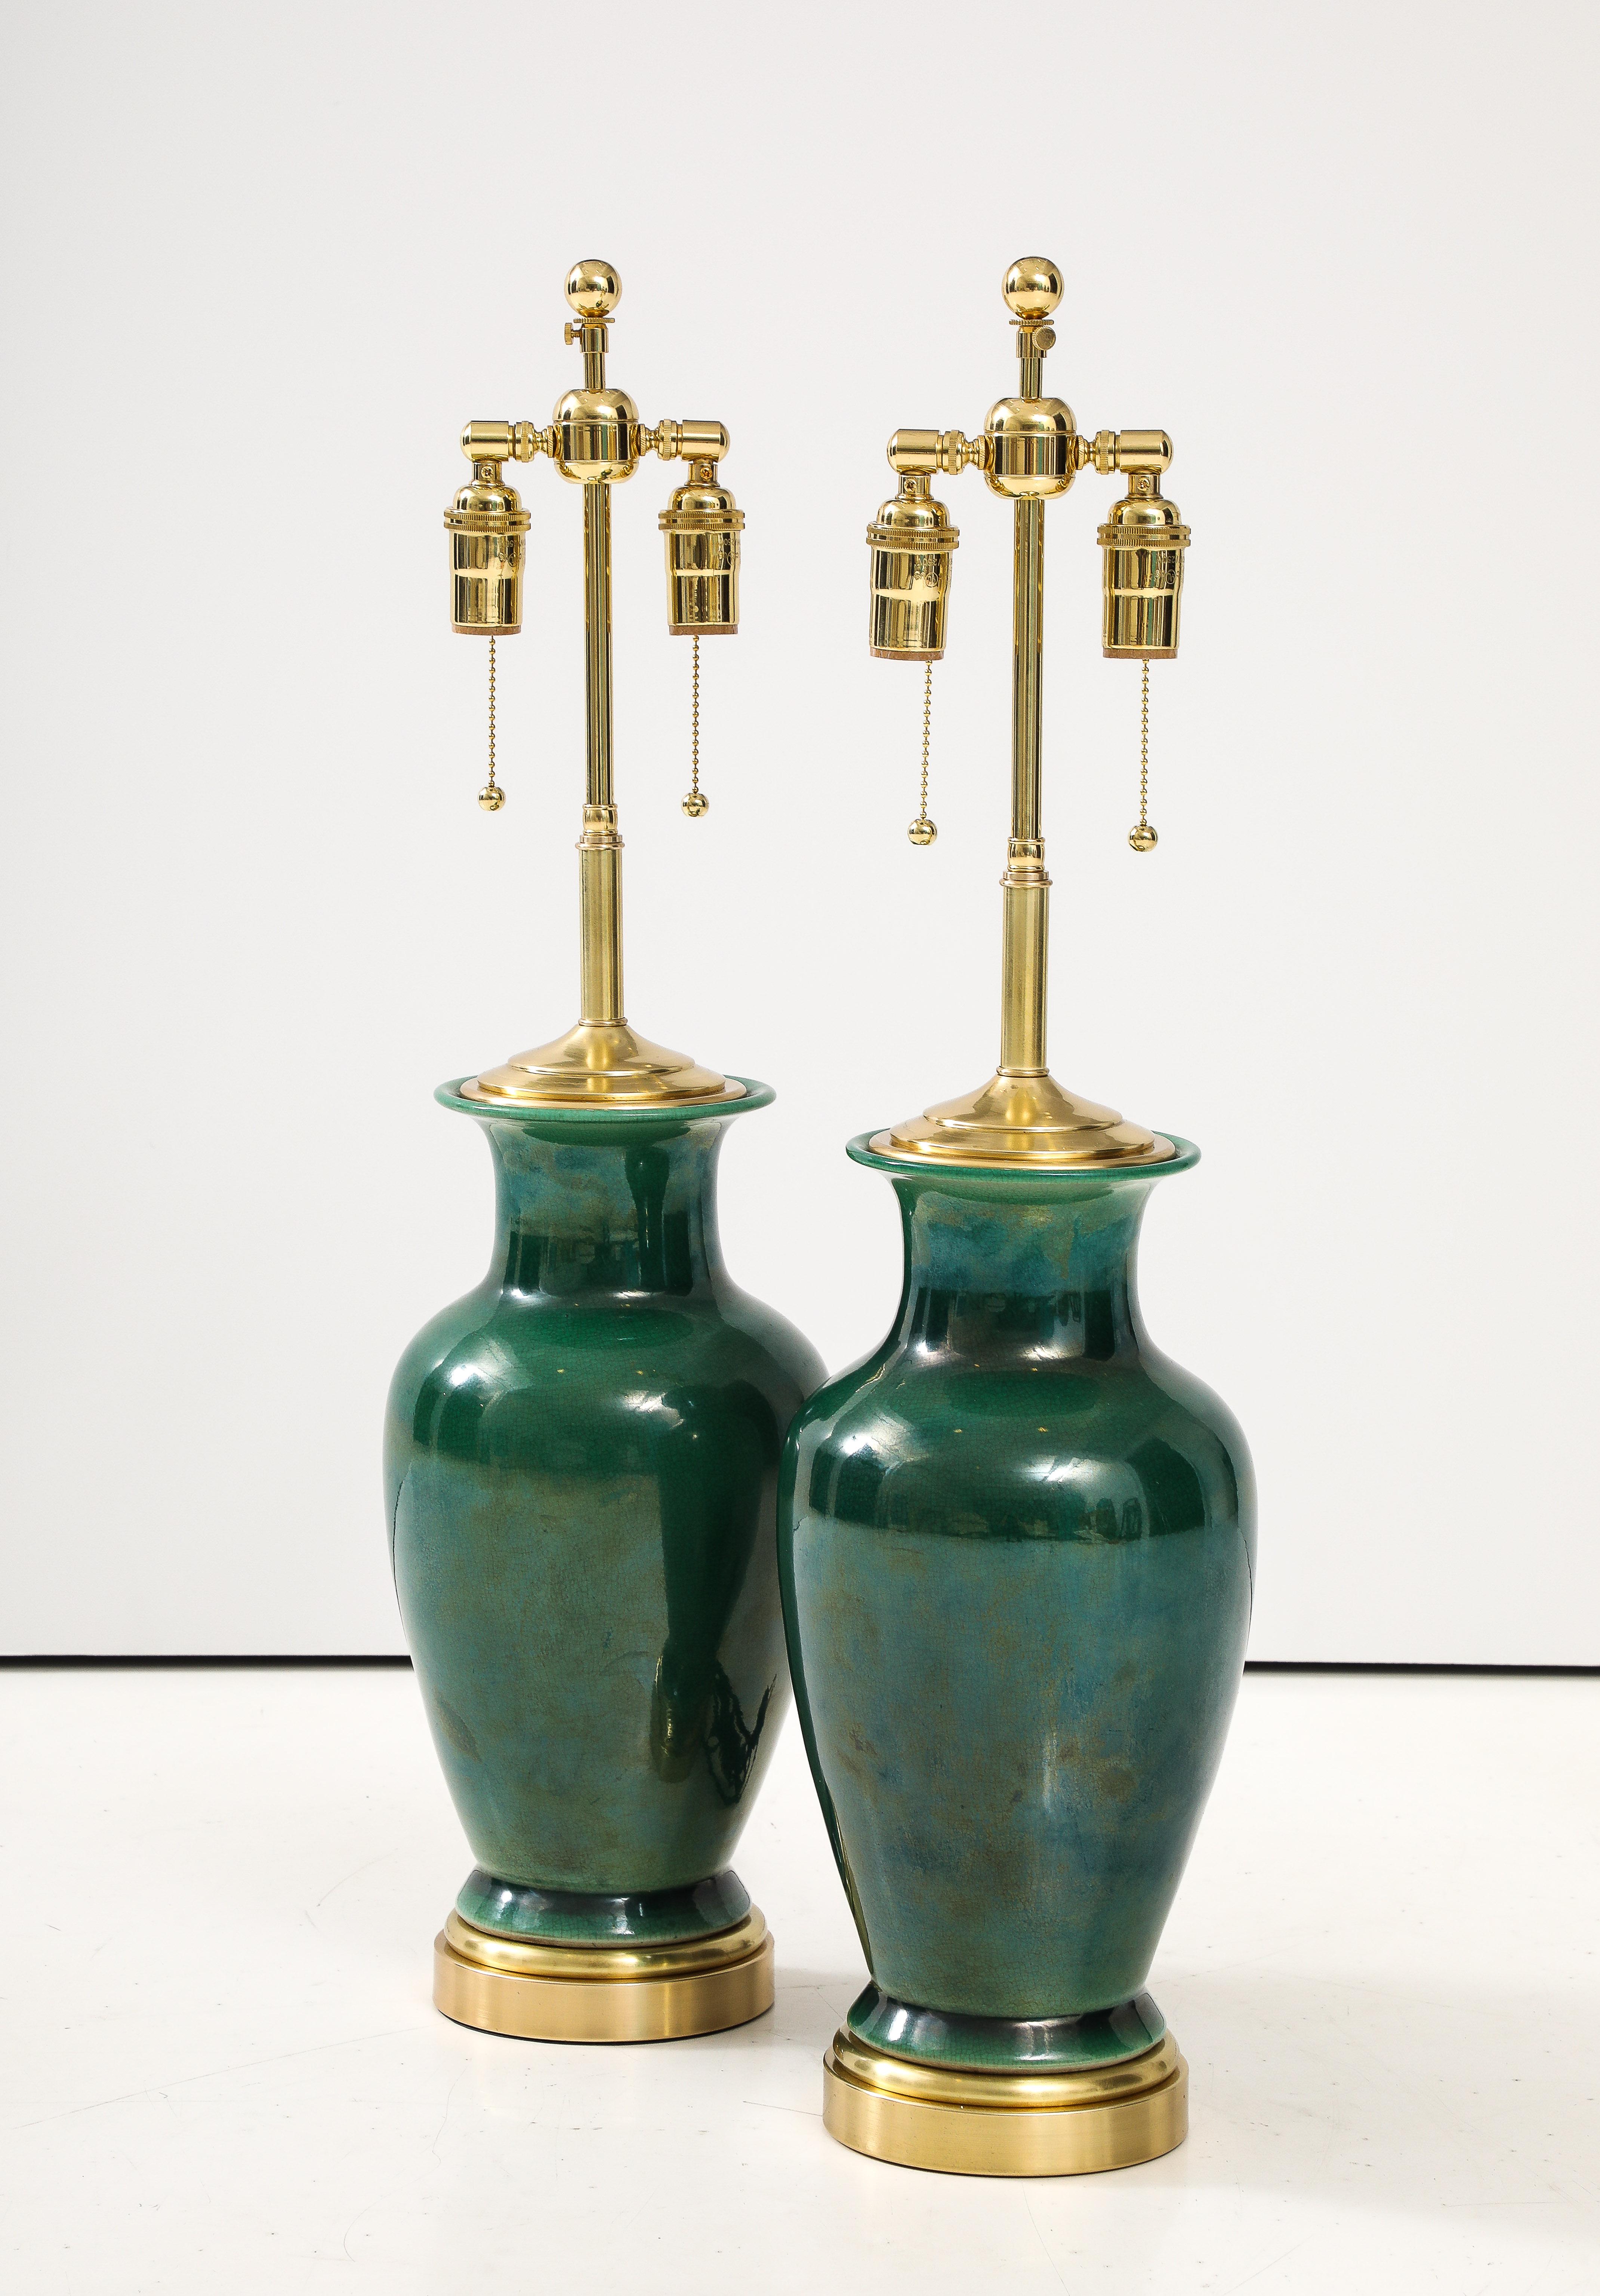 Beautiful Pair of Japanese Urn shaped ceramic lamps with a green crackle glaze finish.
The lamps have been Newly rewired with adjustable polished brass double clusters and 
silk rayon cords.
Each light socket takes up to 60 Watts / 120 Watts per